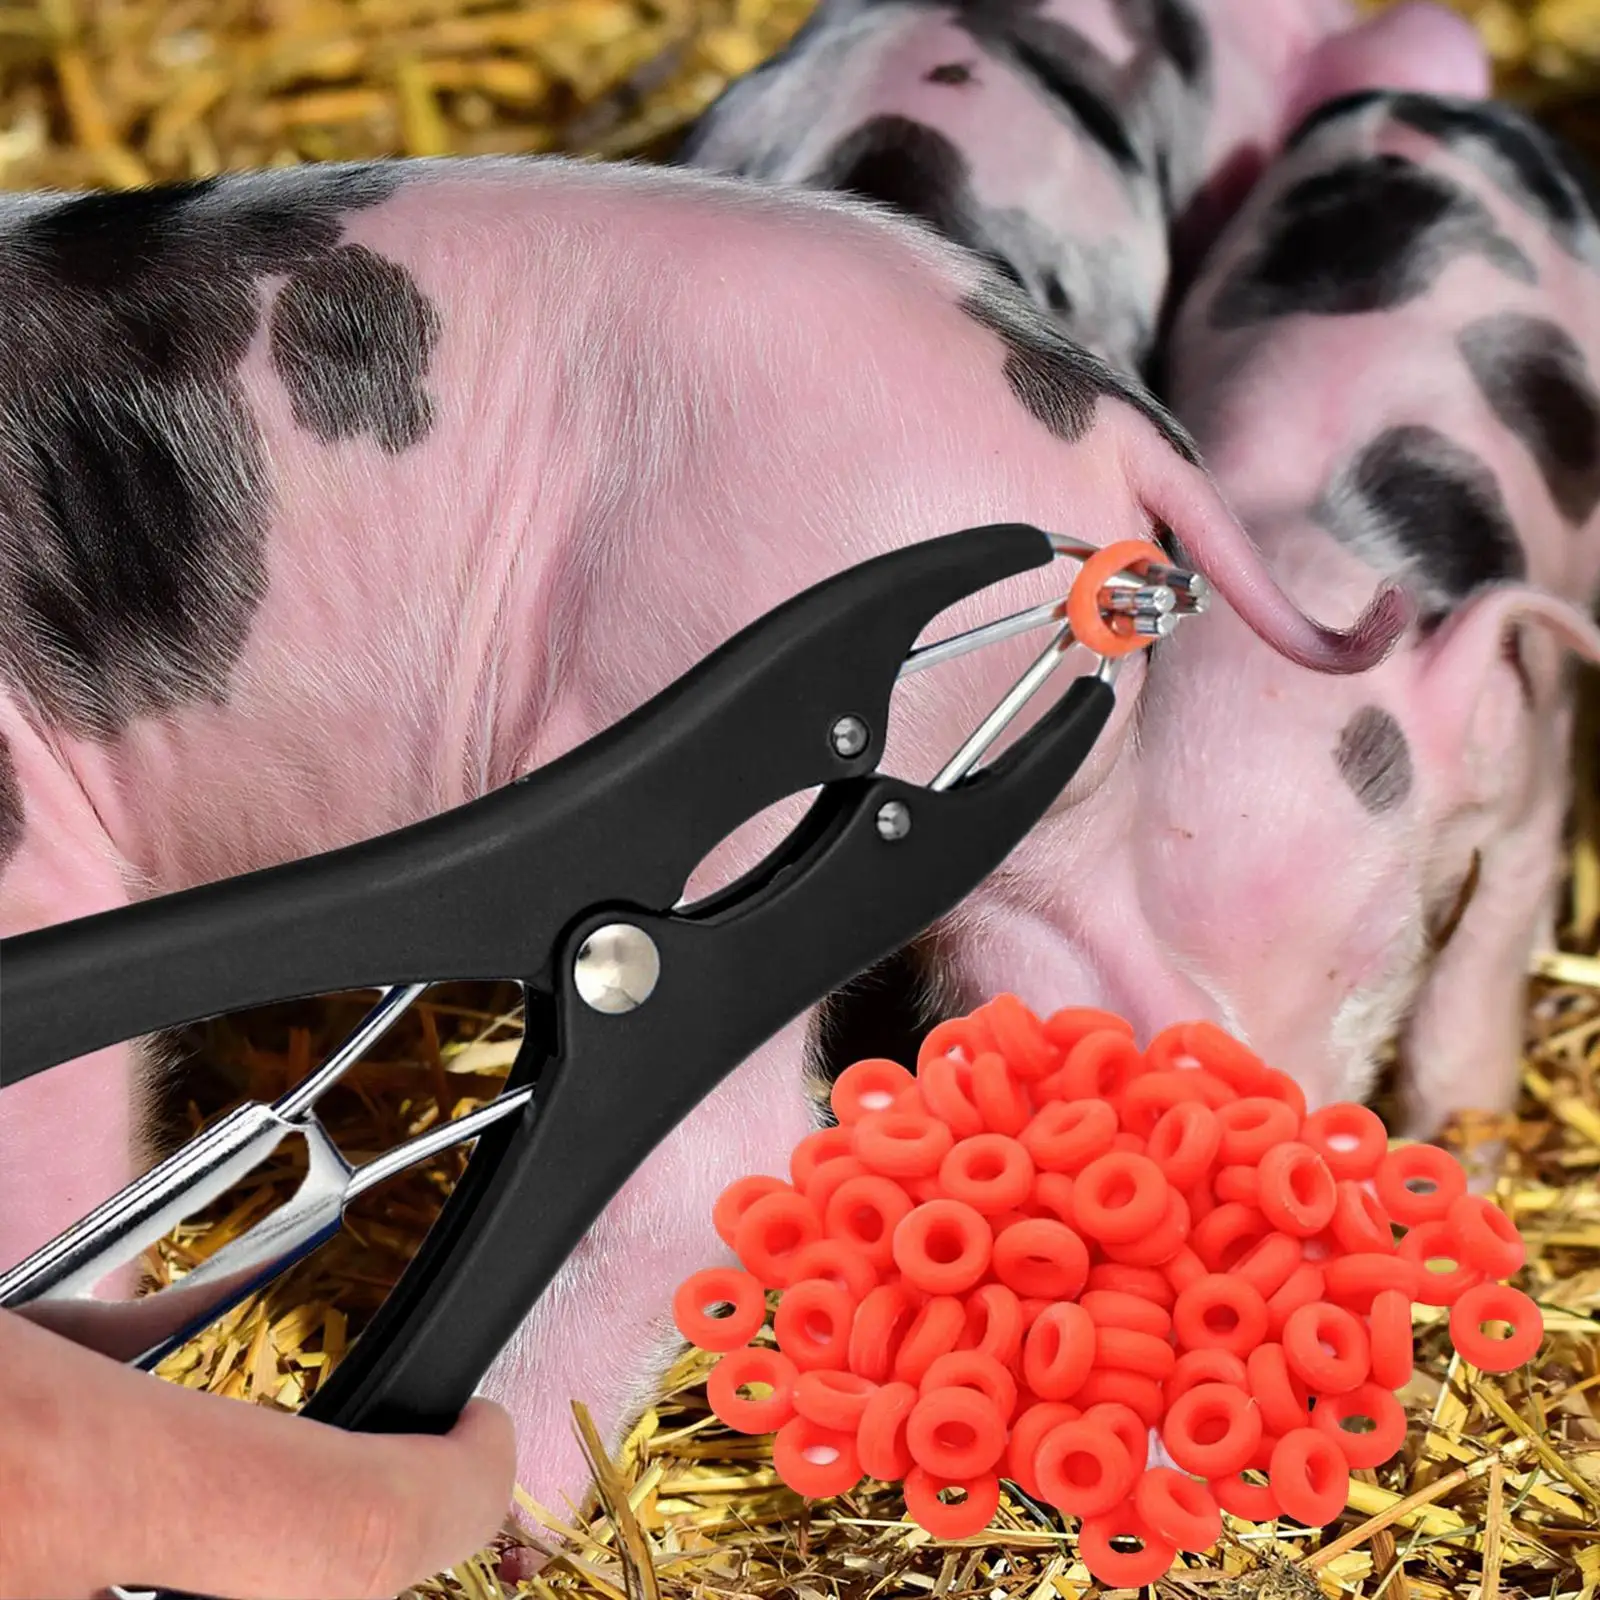 Castration Plier Animal Equipment Tool Castration Banding Tail Livestock Castration Bander Pig Tail Cutting Clamp for Piglets